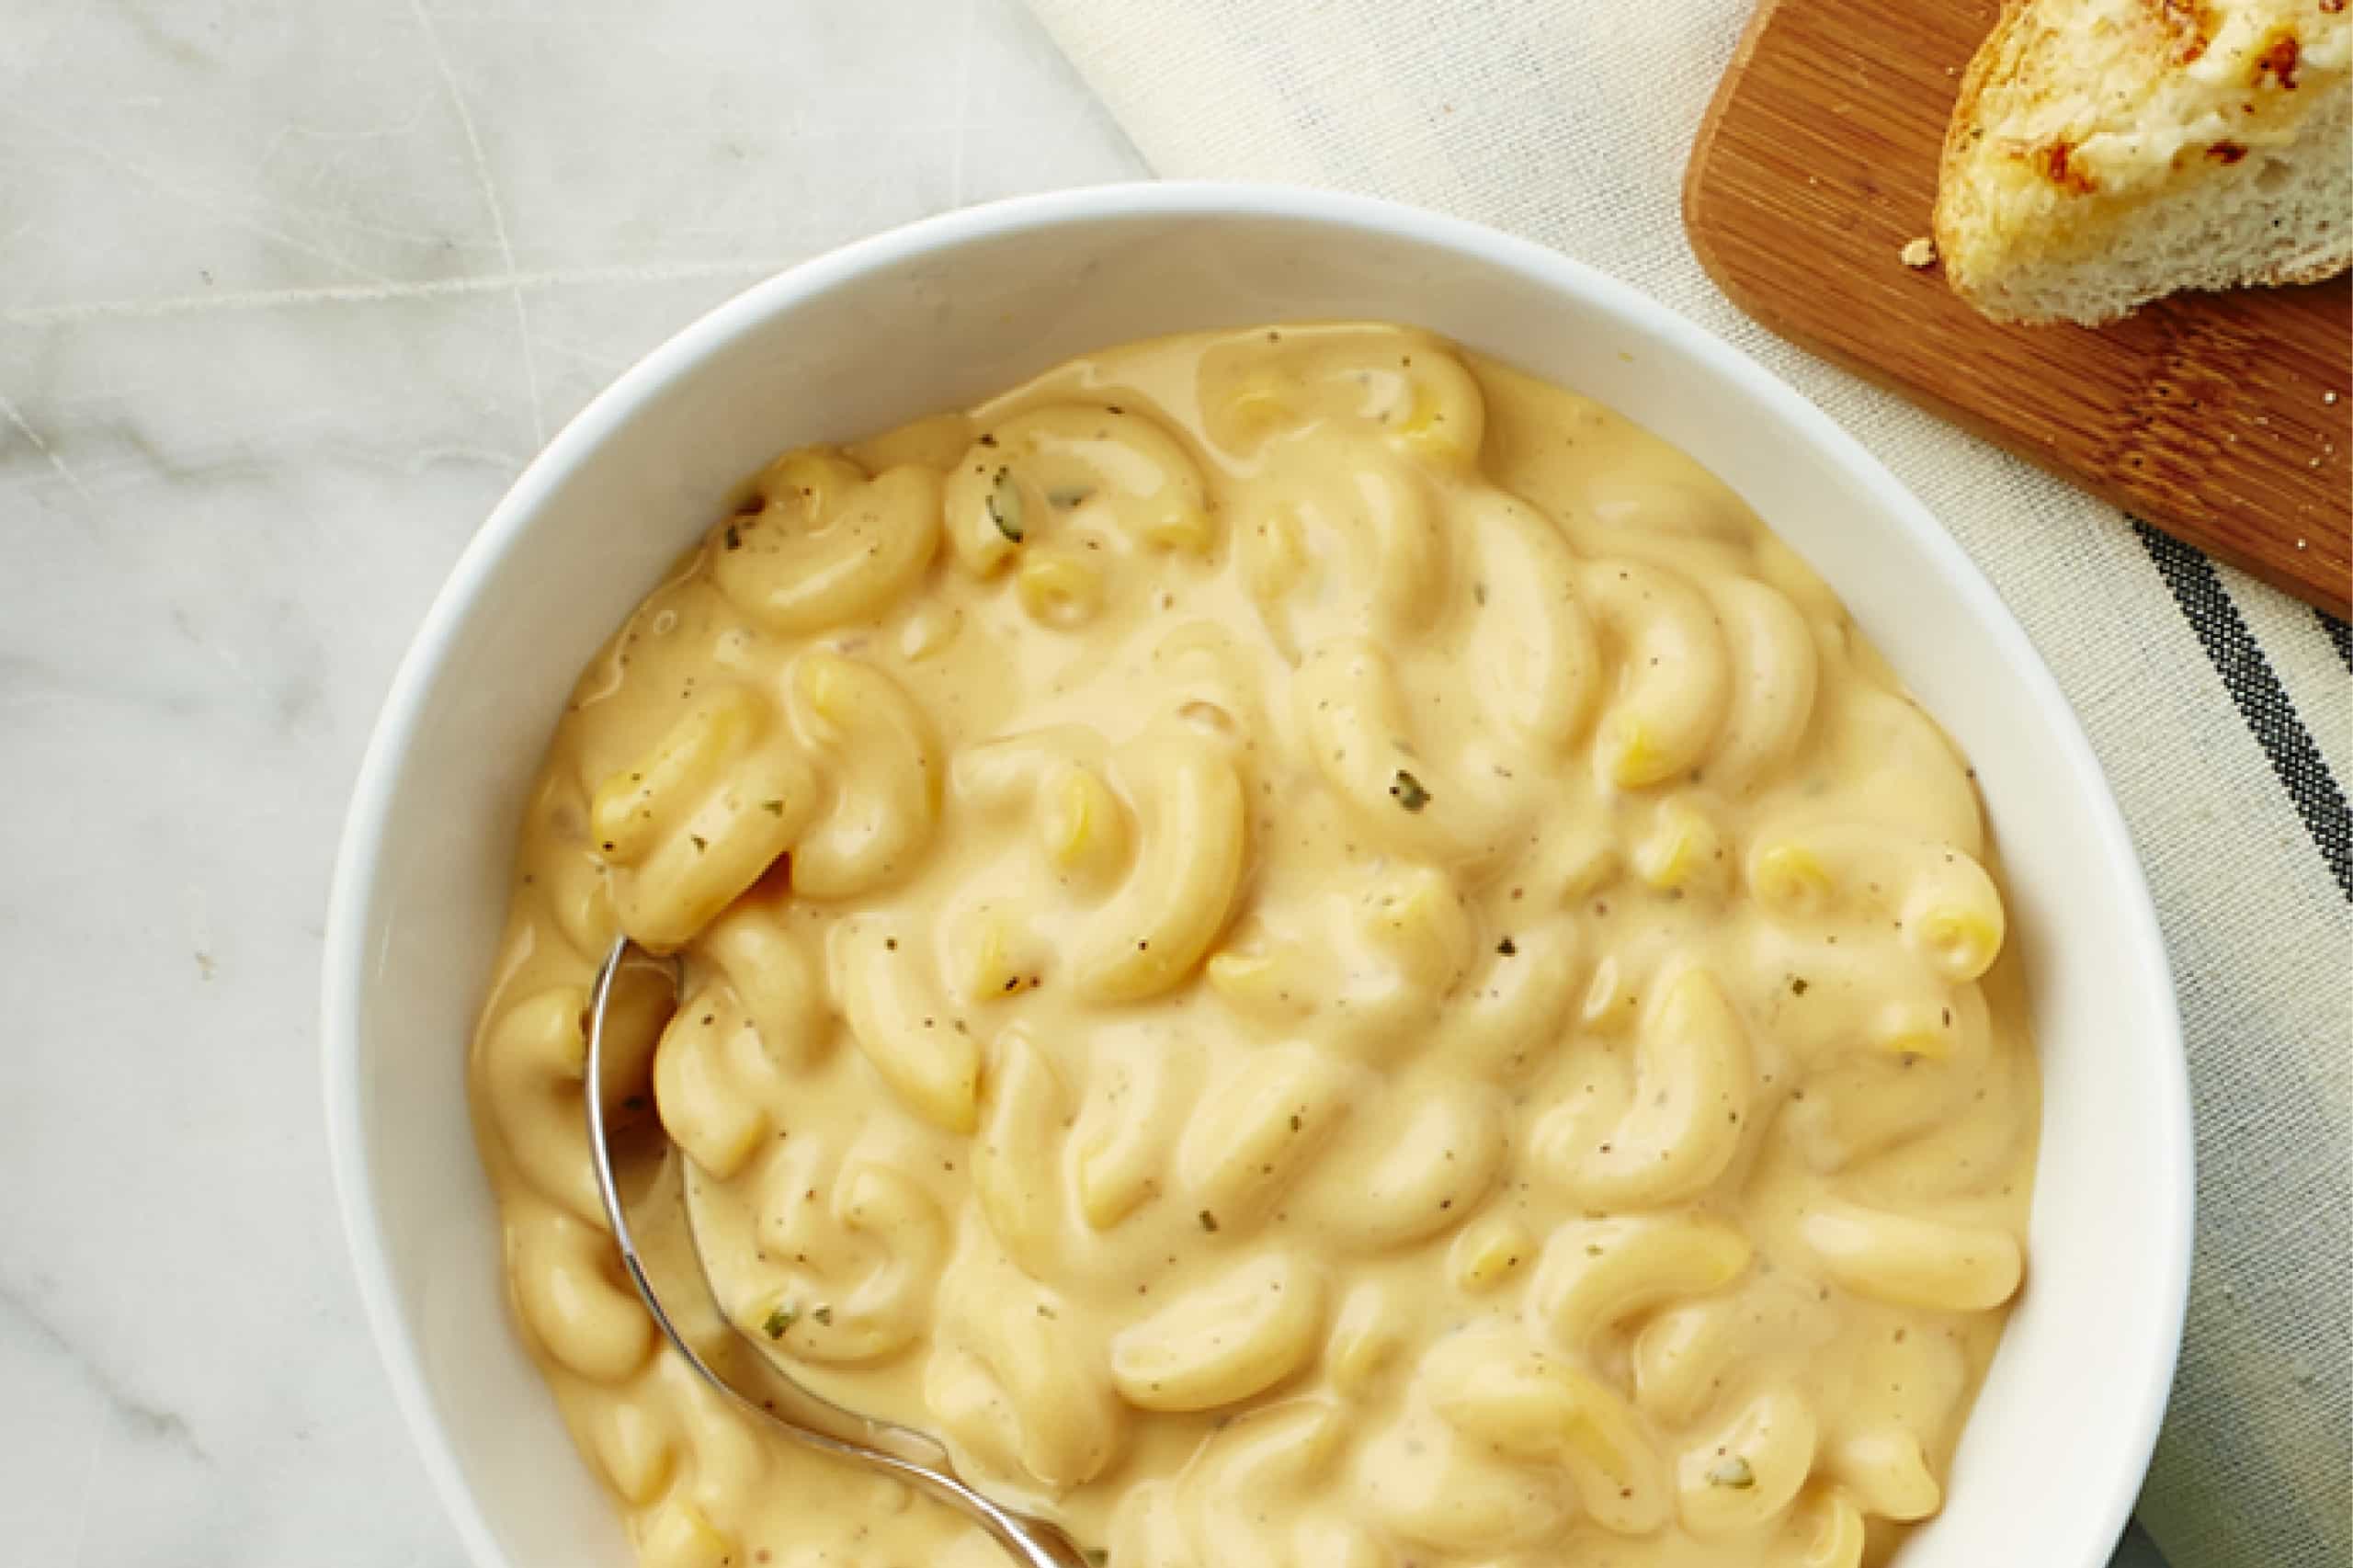 kraft mac and cheese noodles comes out slimy